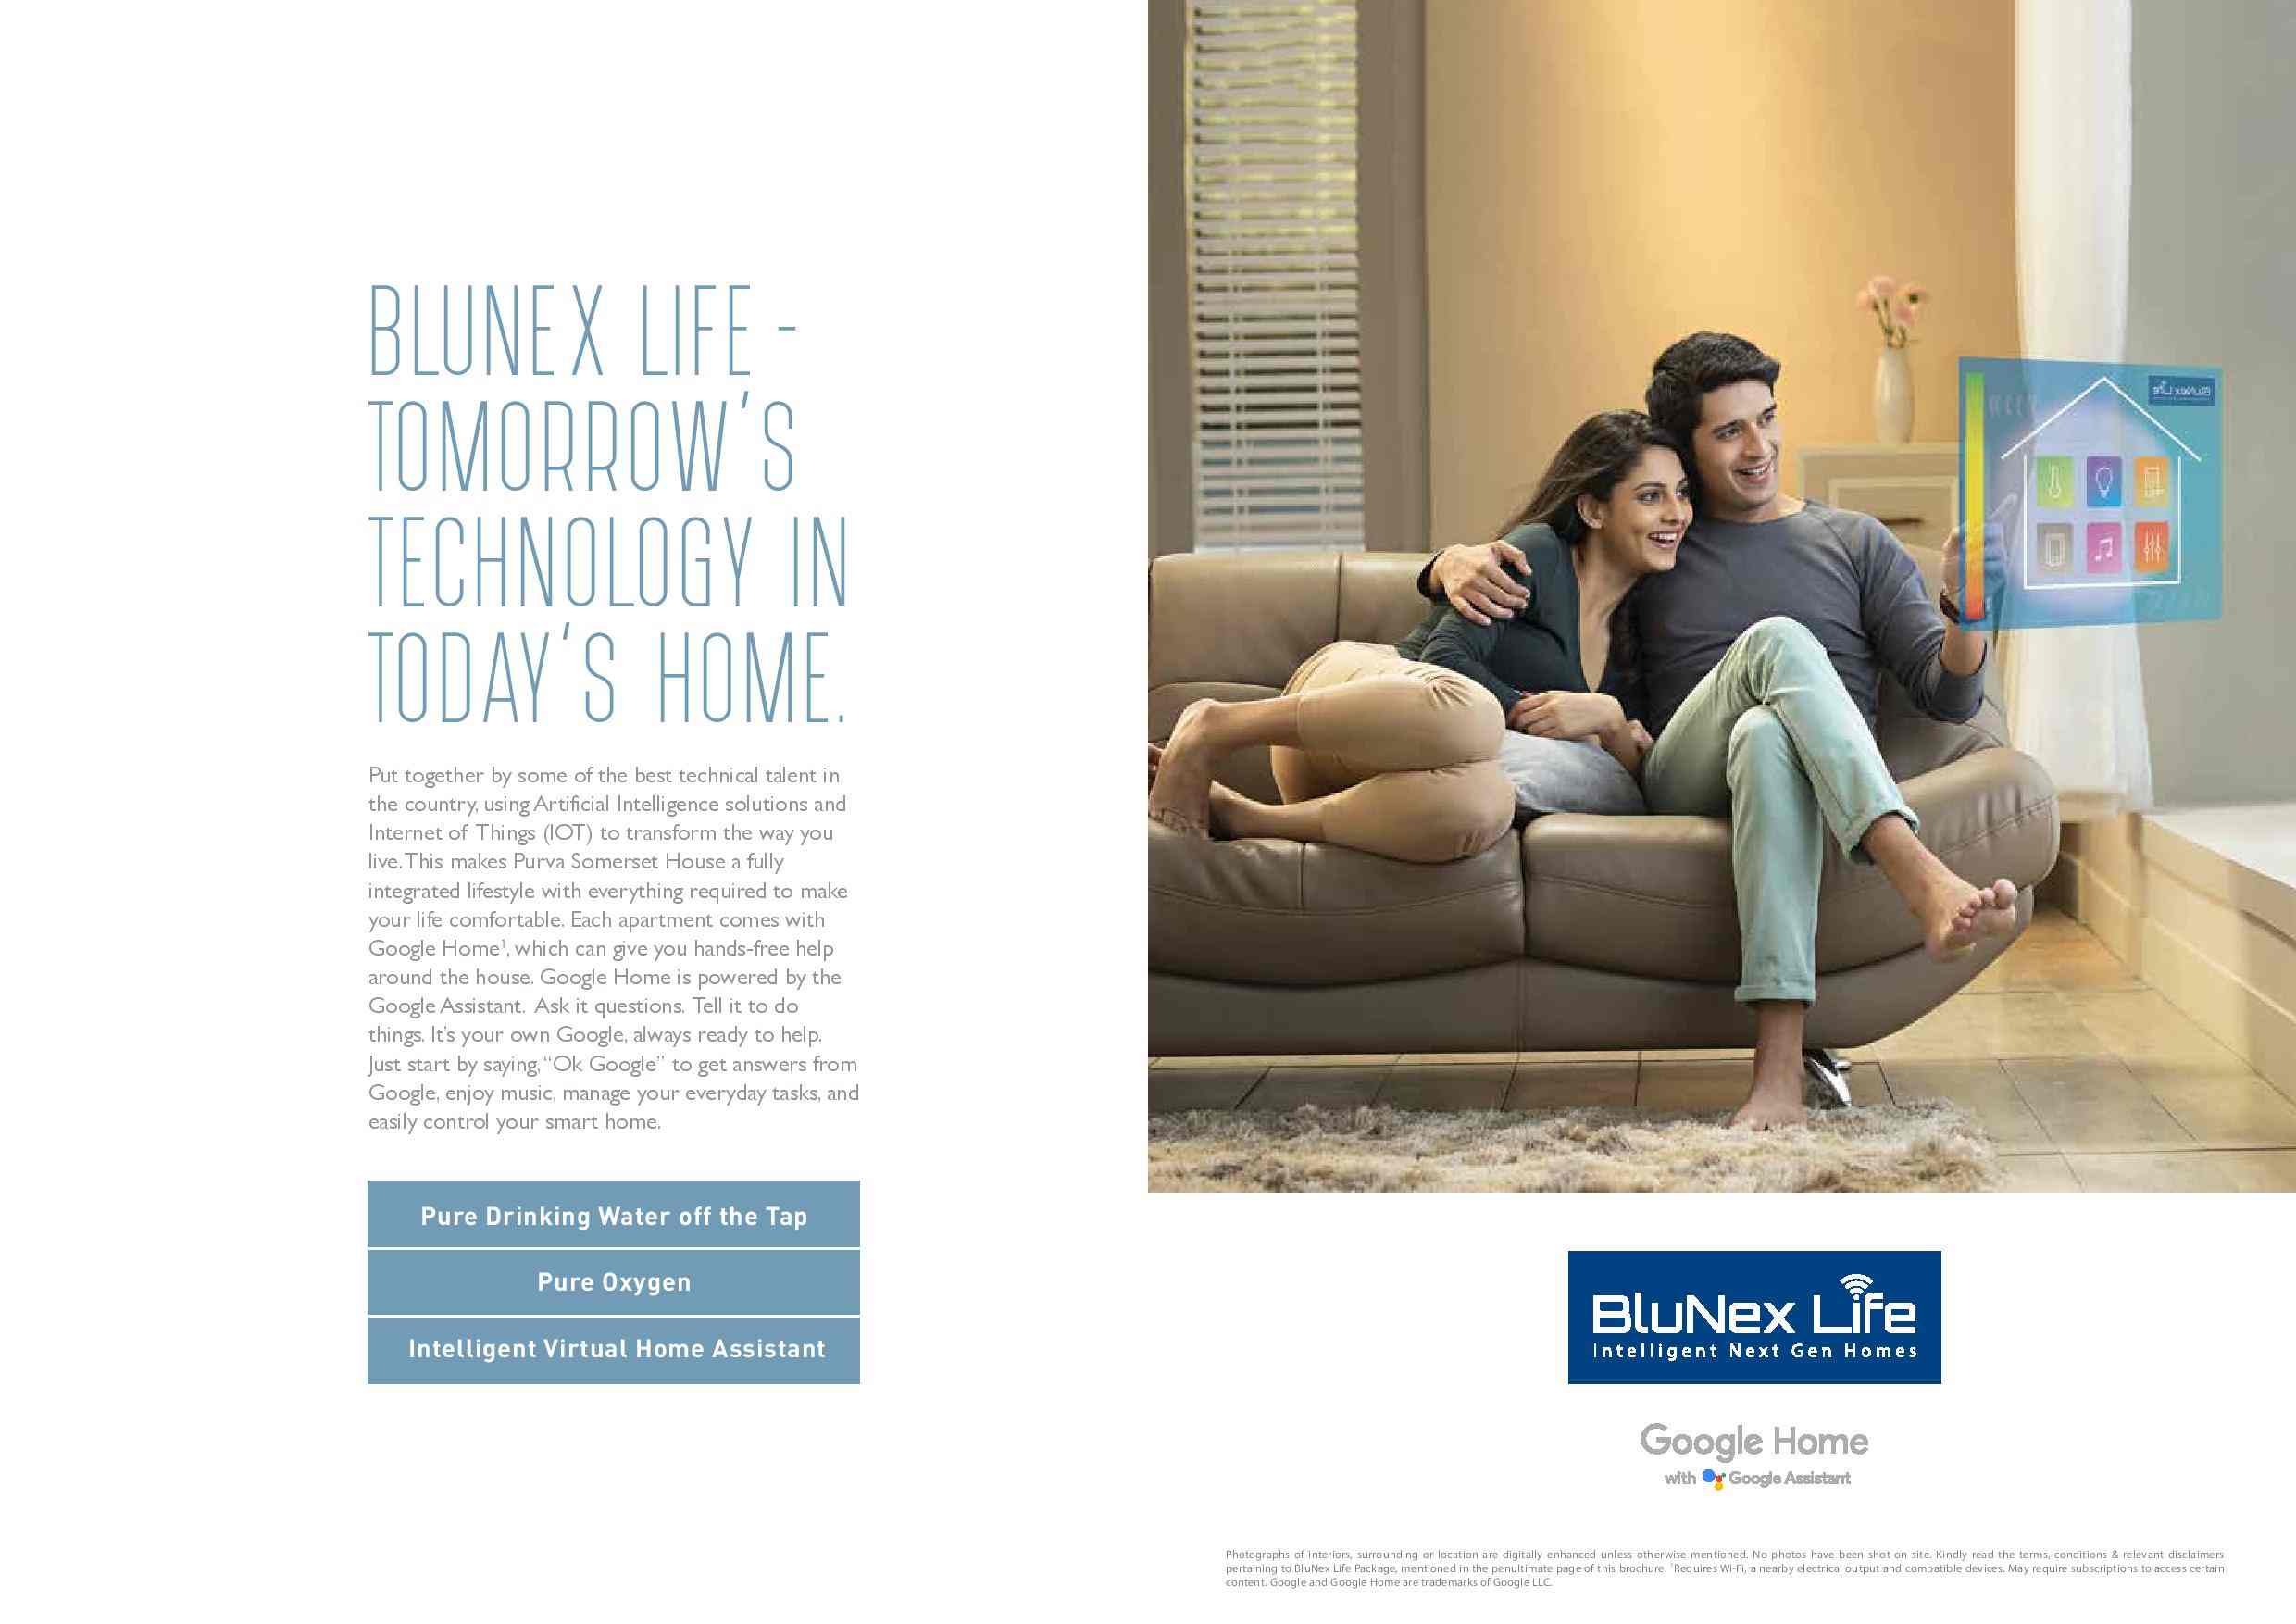 Presenting BluNex Life - tomorrow's technology in today's home at Purva Somerset House in Chennai Update